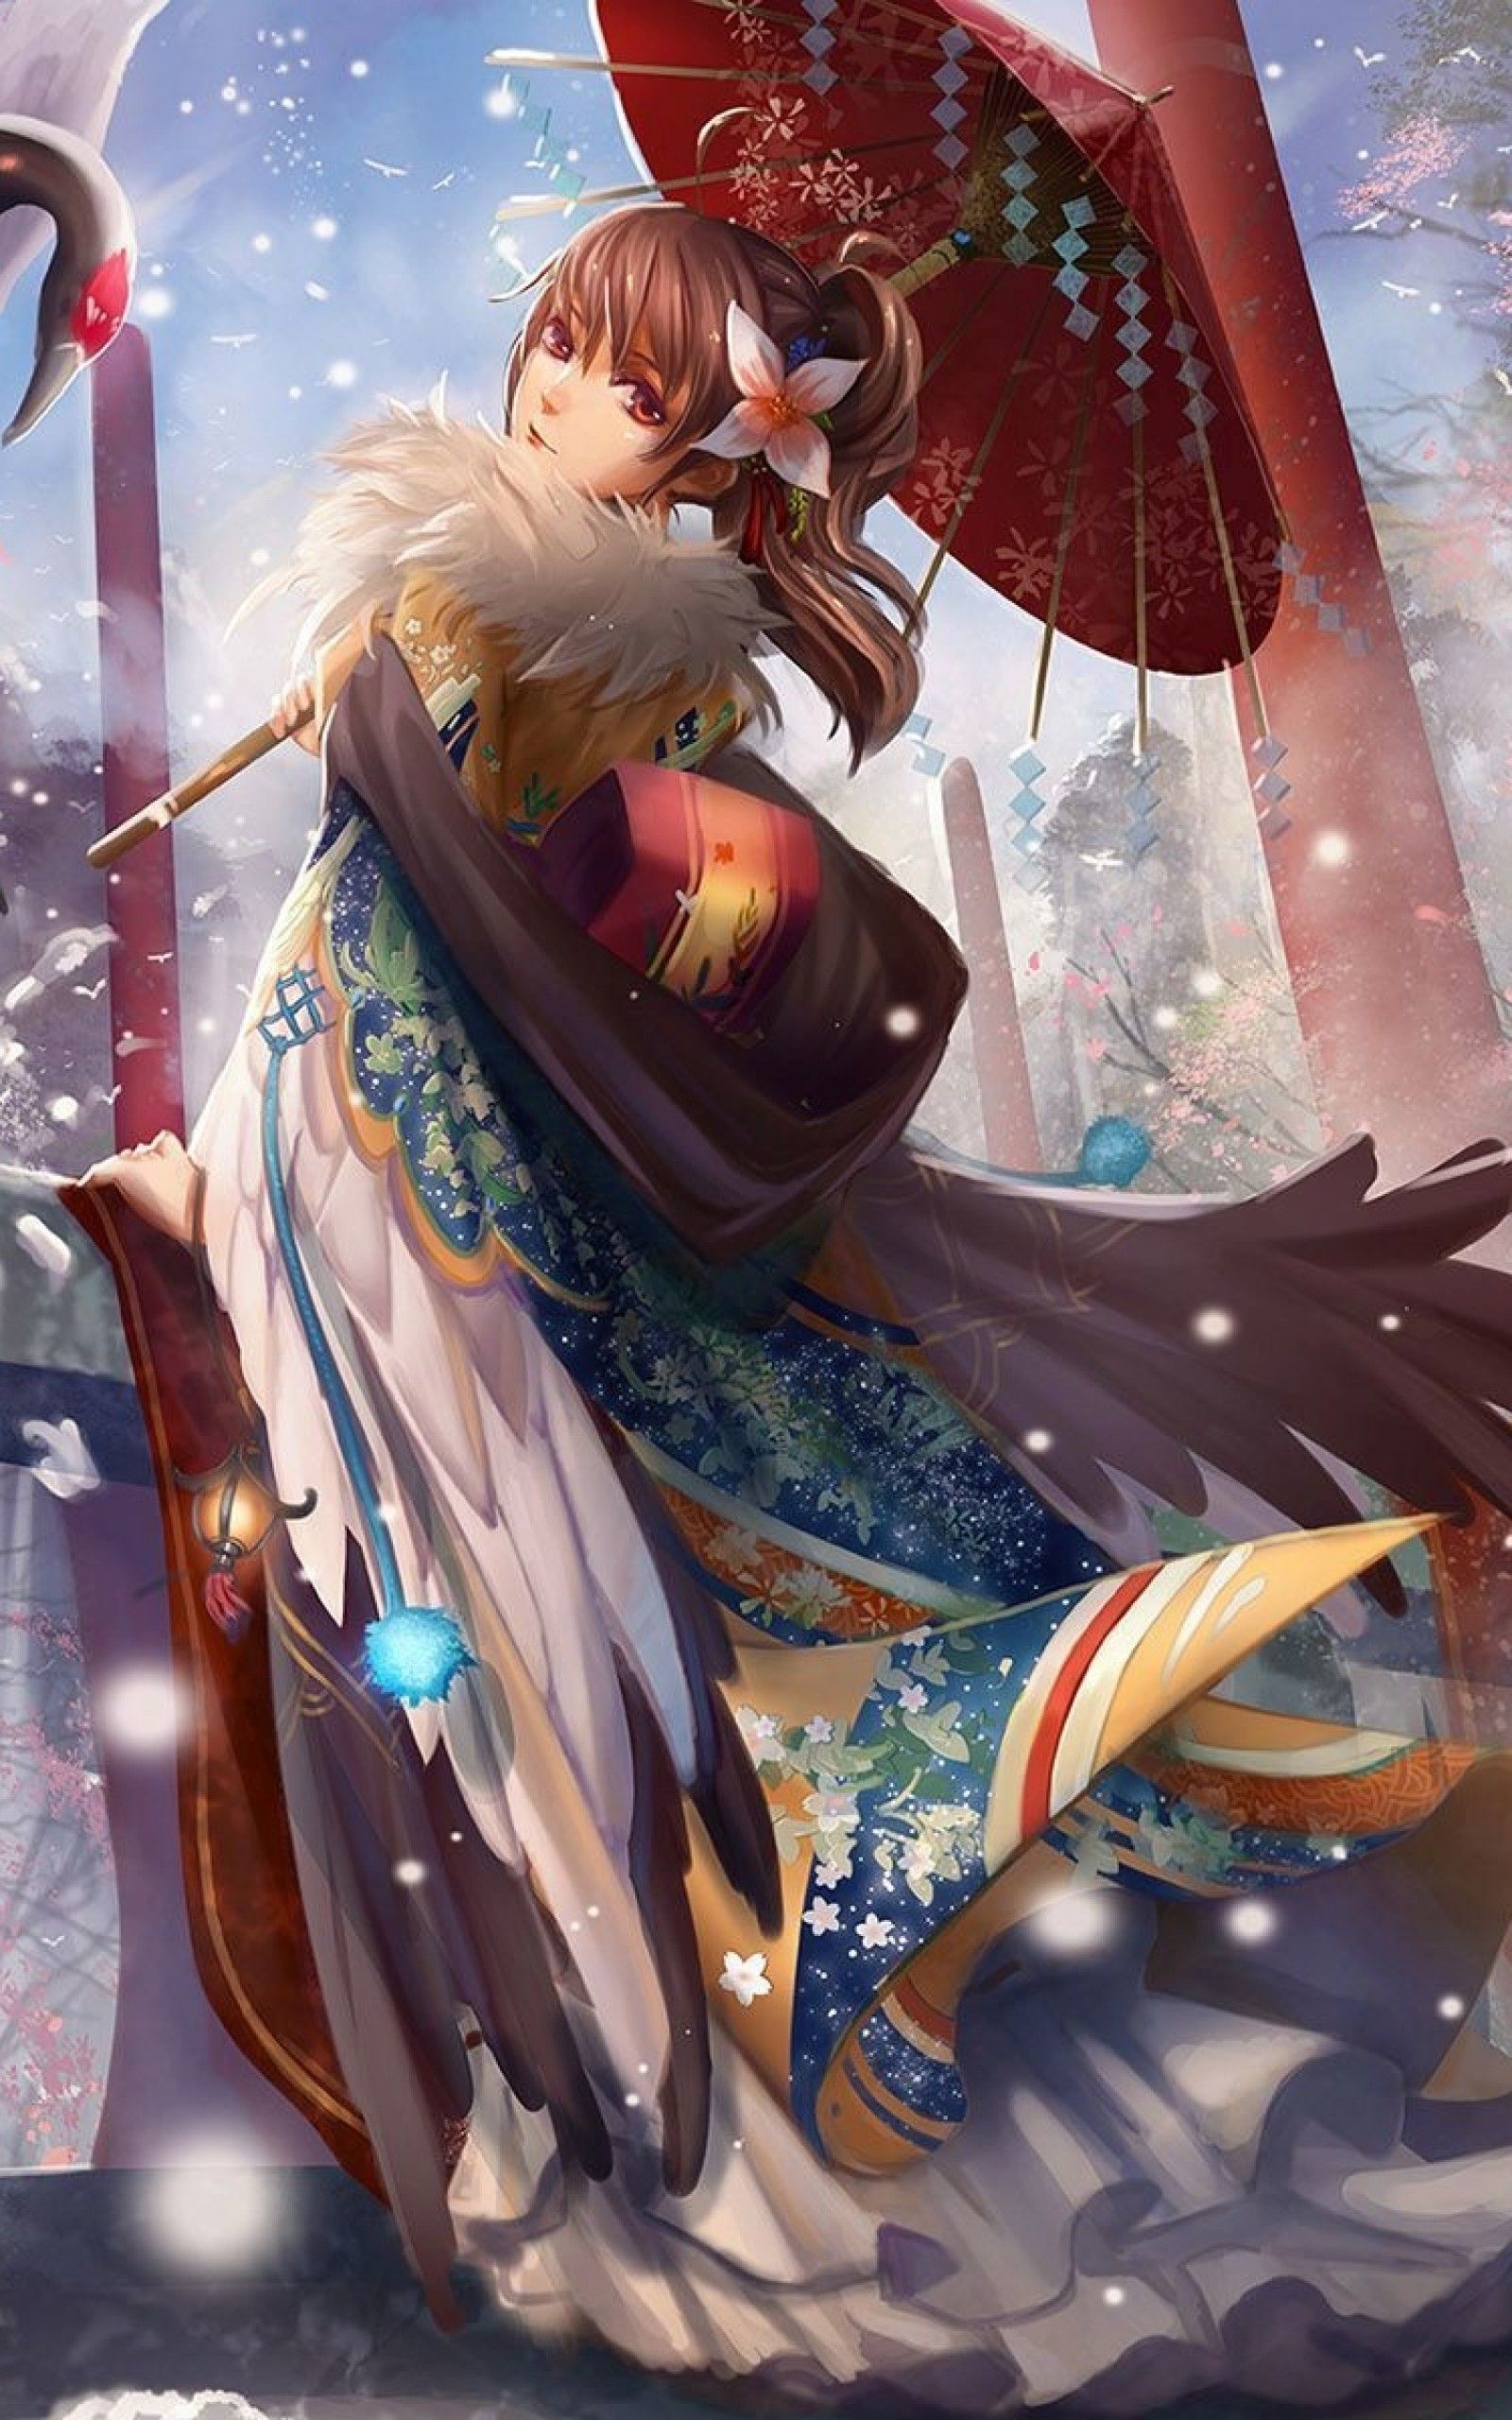 Download 1600x2560 Chinese Anime Girl, Umbrella, Chinese Outfit, Snow, Sakura Blossom Wallpaper for Google Nexus 10